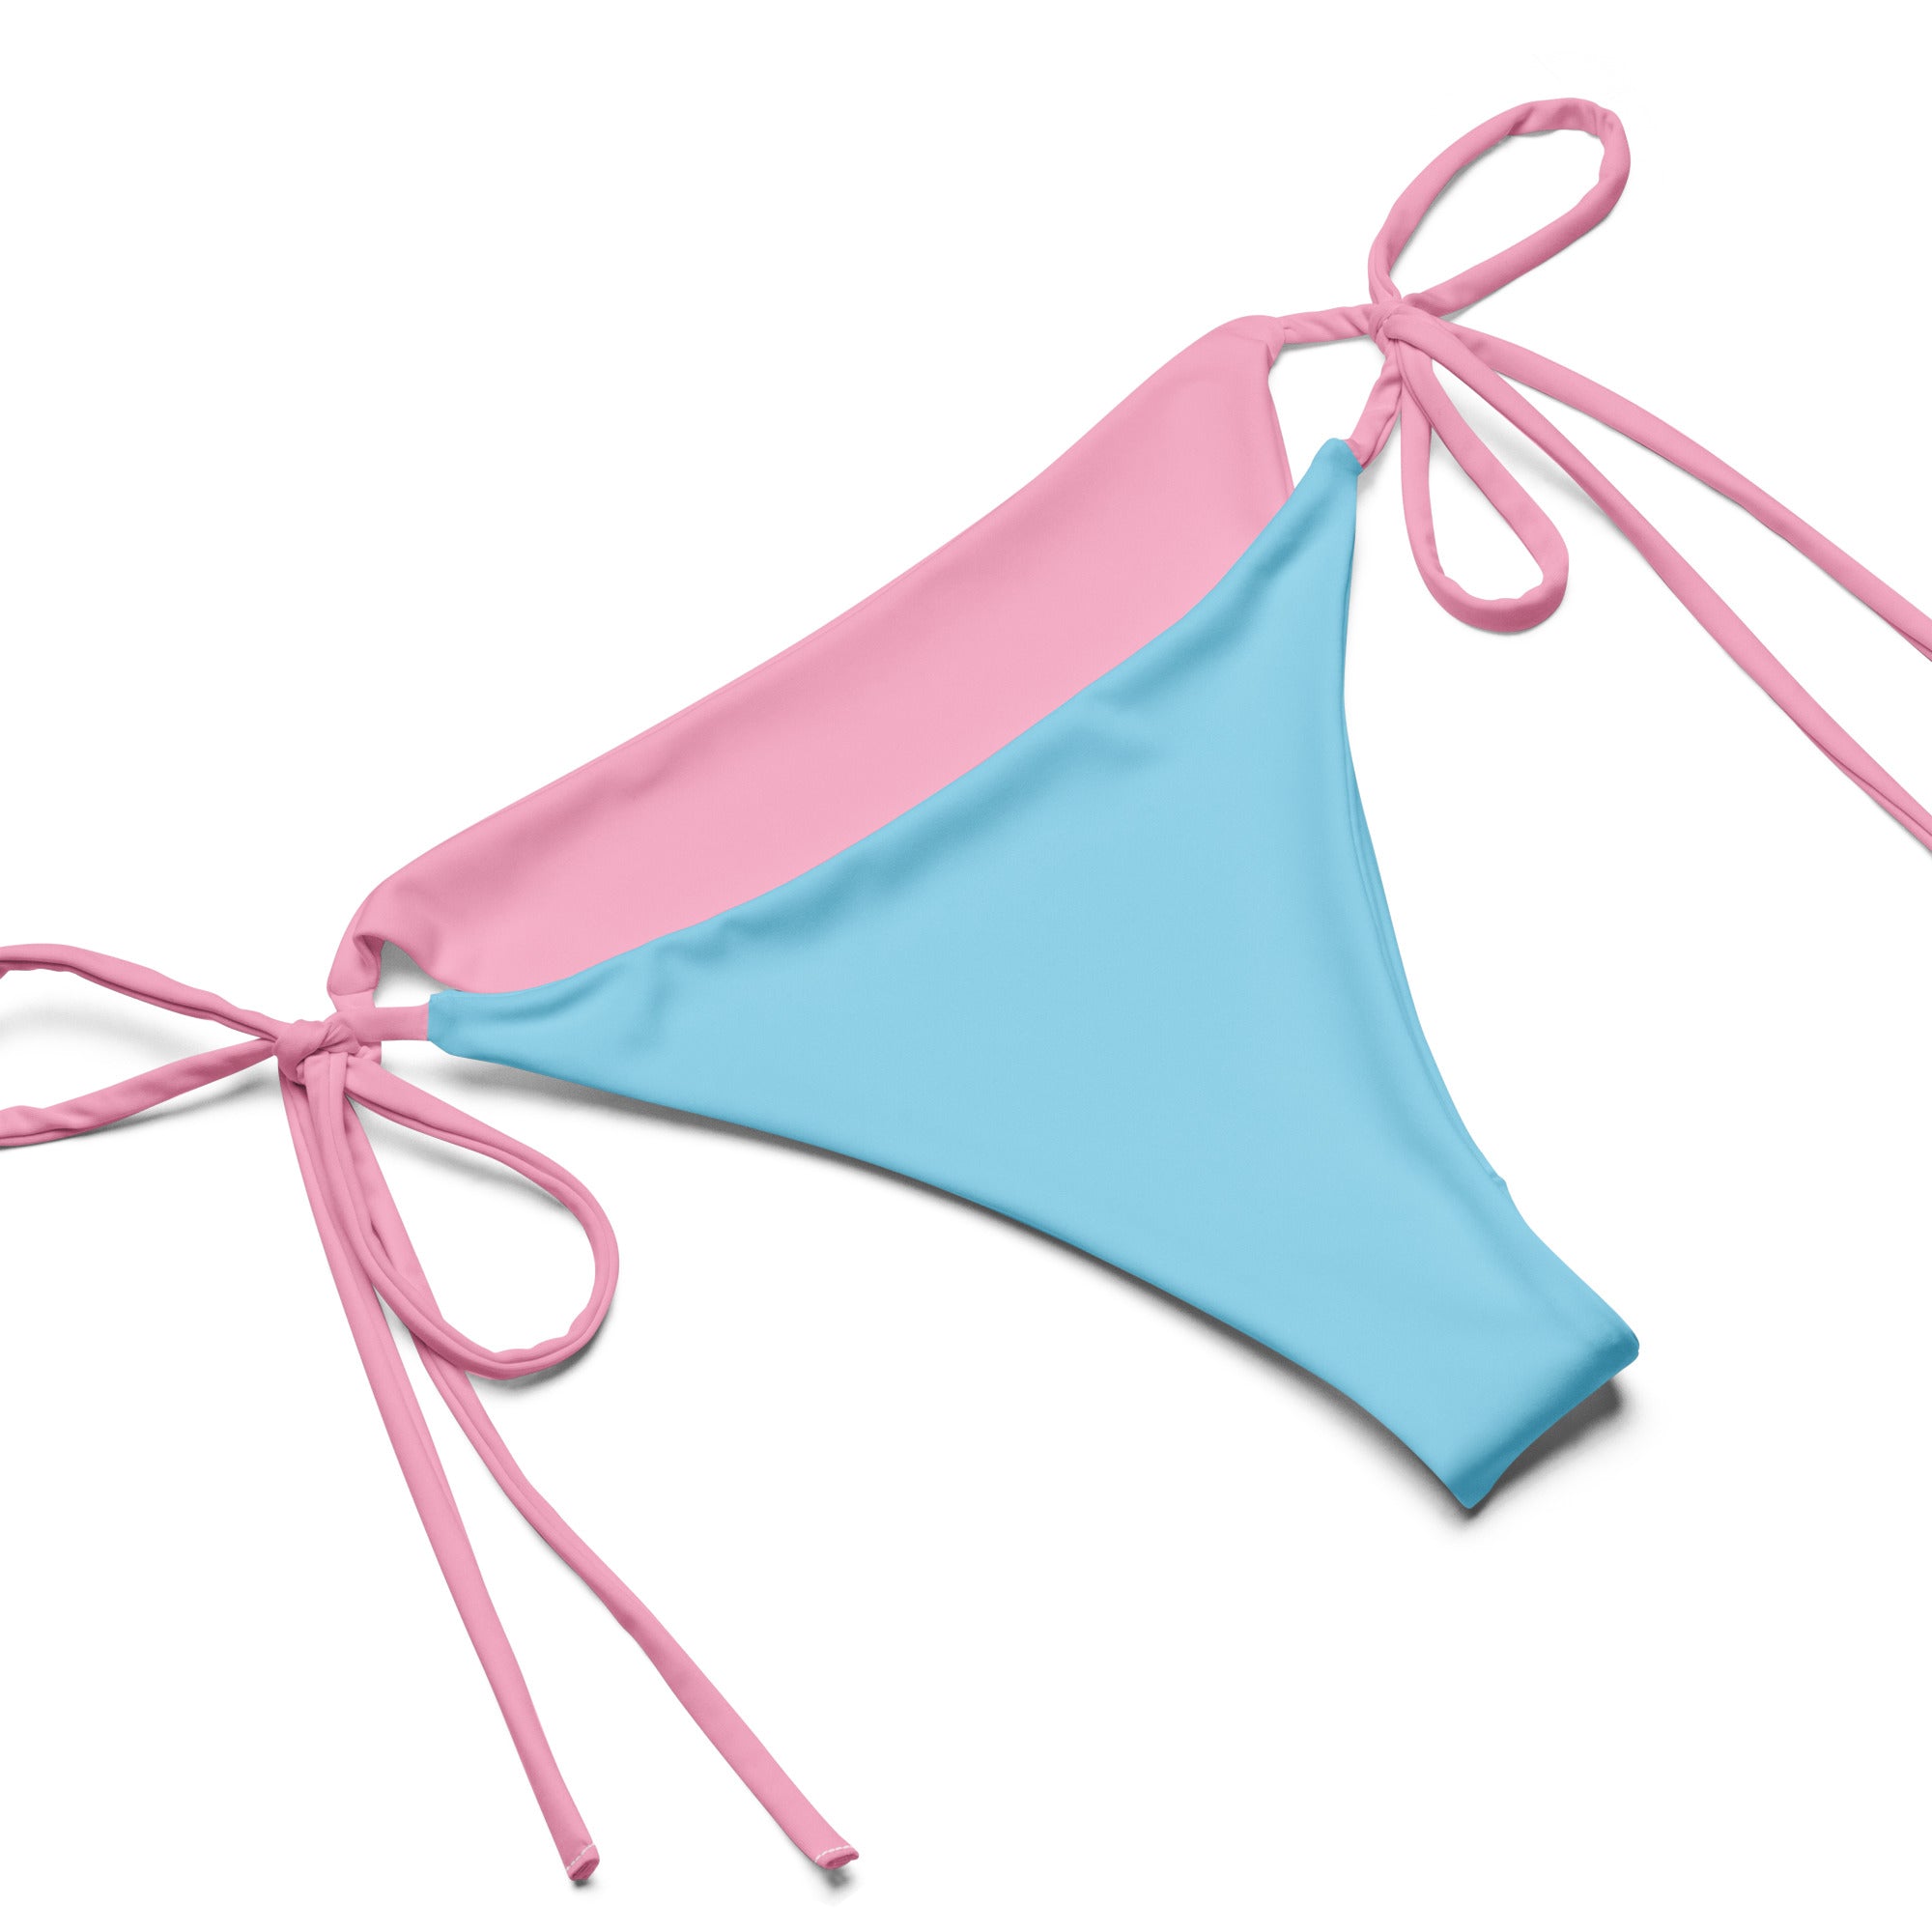 SPRY SZN Two-Piece Swimsuit - Columbia Blue Top - Cotton Candy Pink Bottom